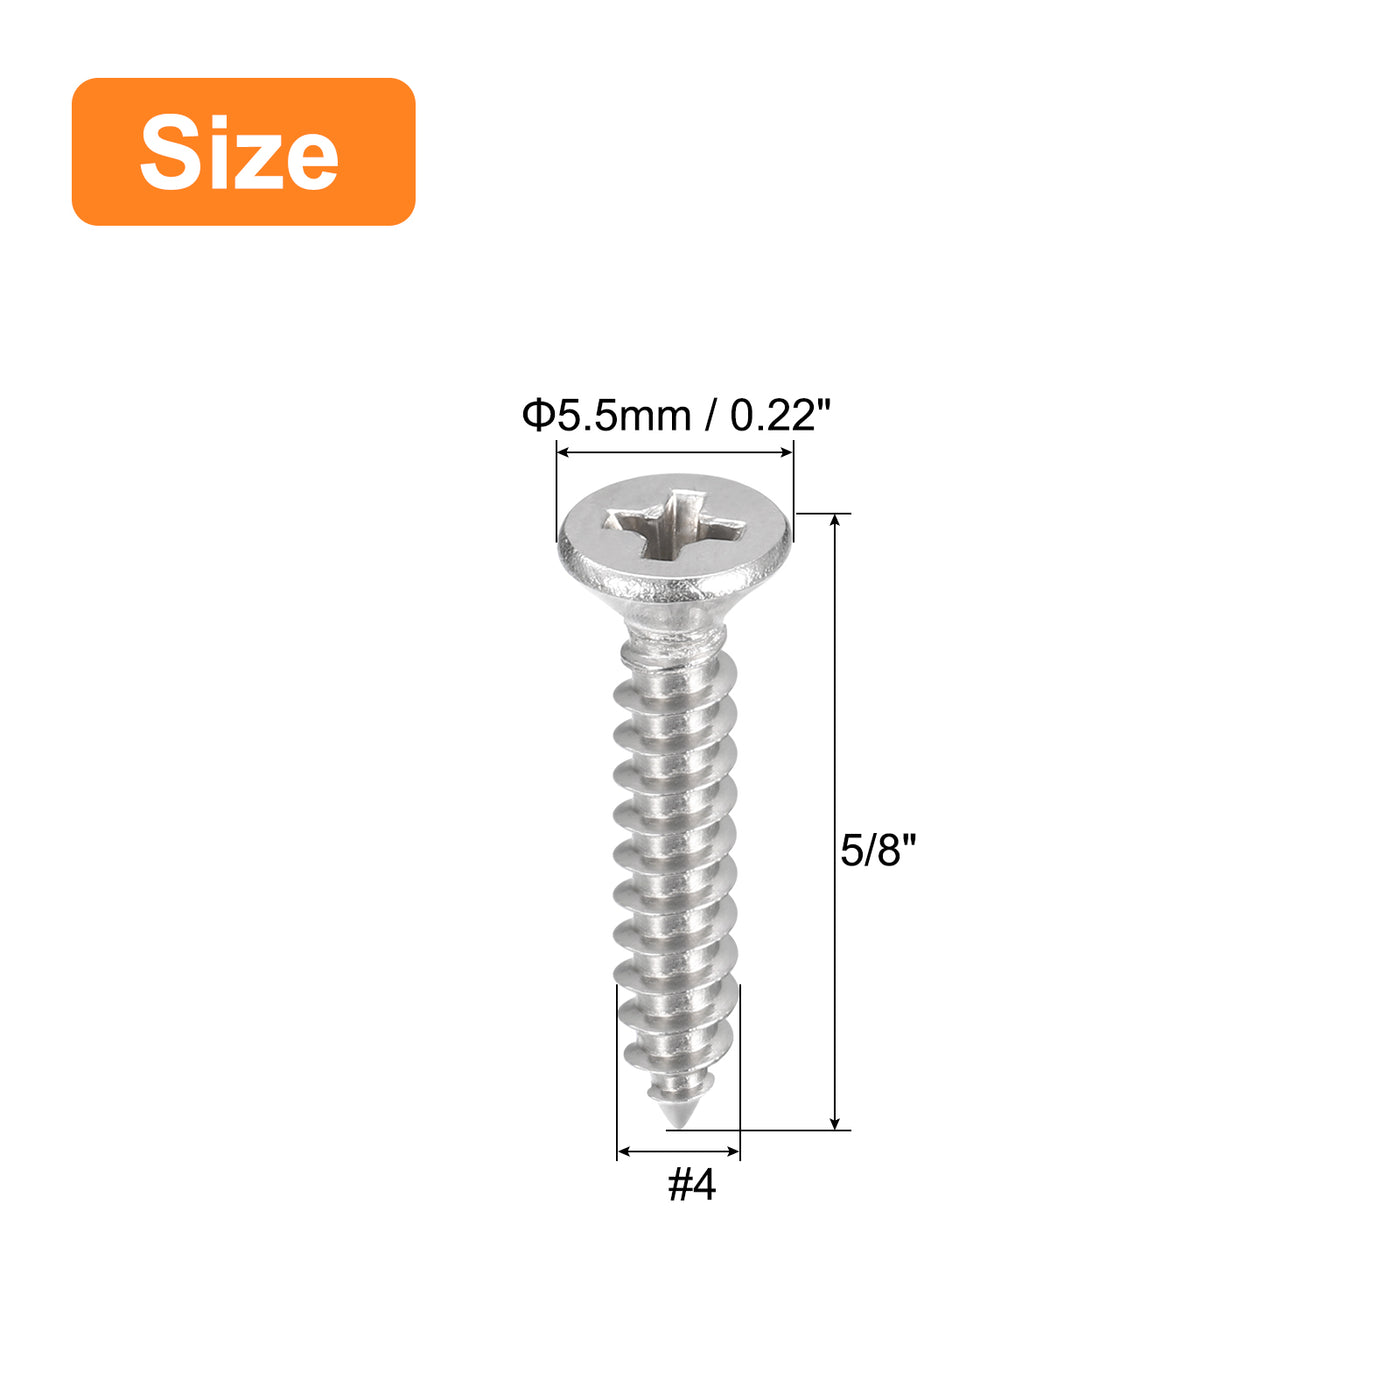 uxcell Uxcell #4x5/8" Wood Screws, 100pcs Phillips Self Tapping Screws 304 Stainless Steel